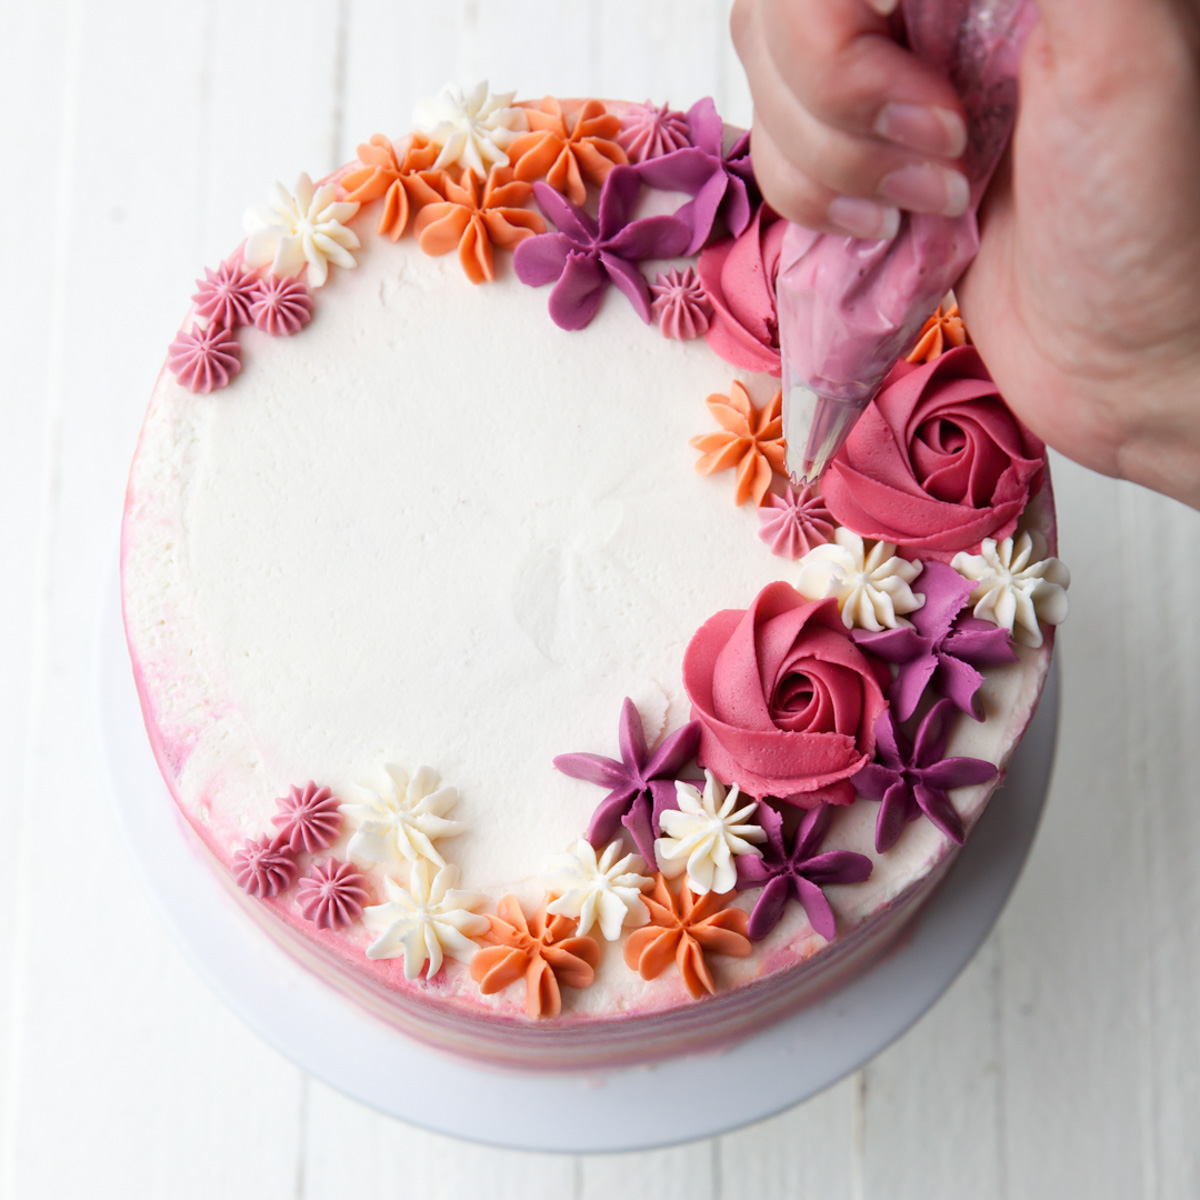 Rose Cake With Strawberry Tamarind Compote and White Chocolate Buttercream  - Belly Over Mind